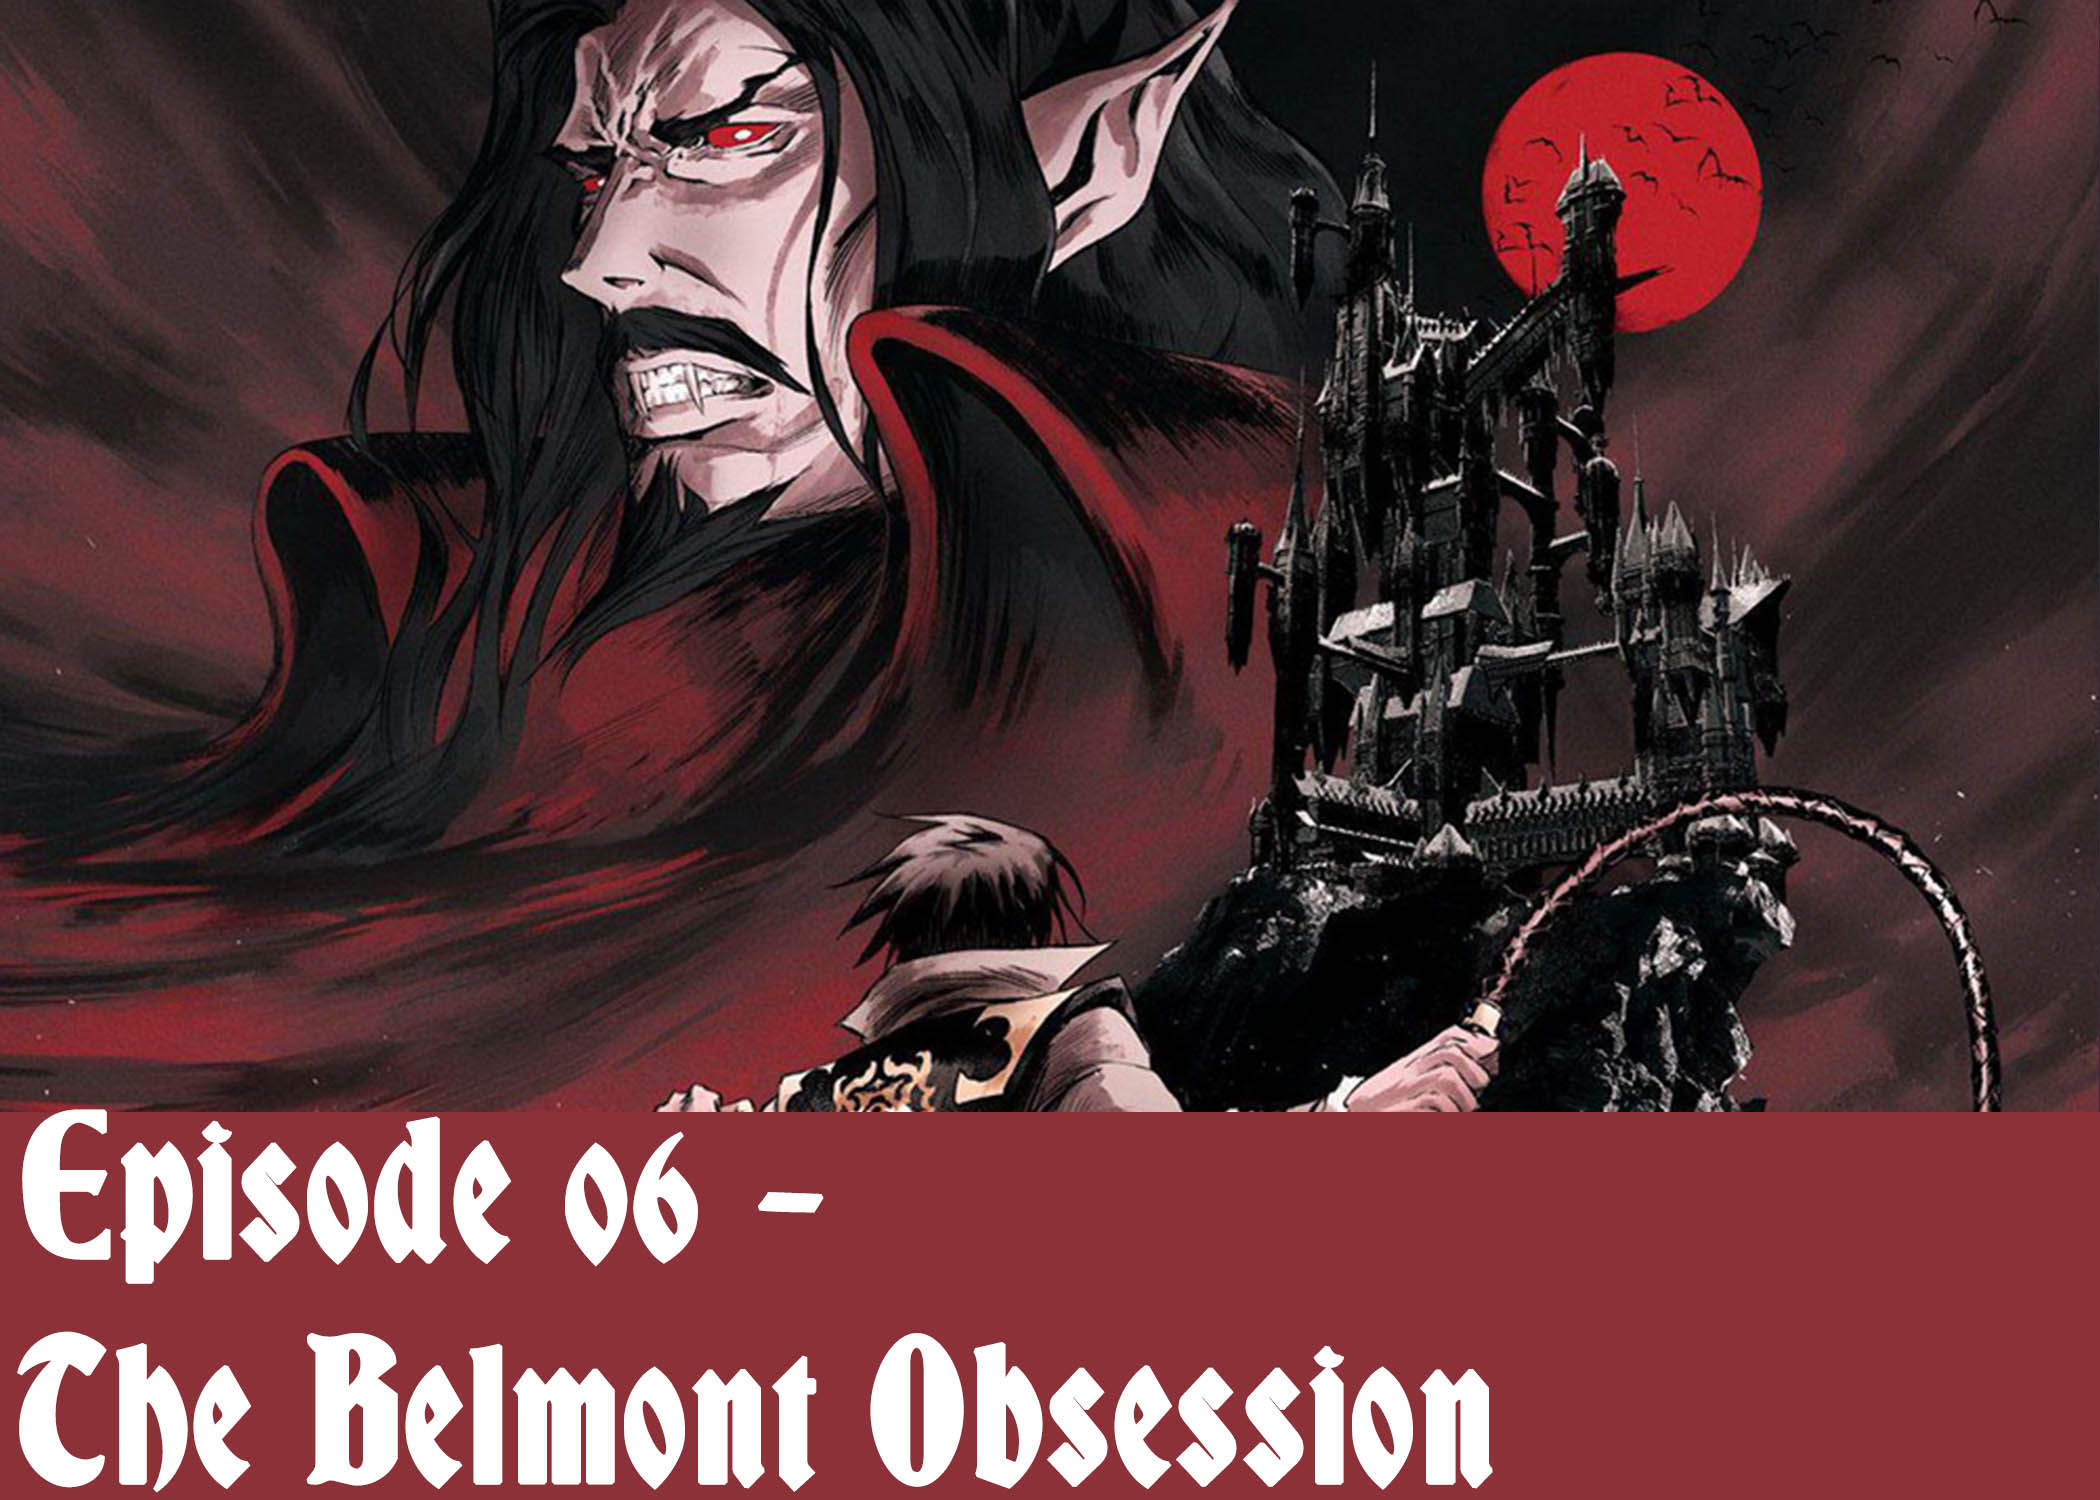 Episode 06 - The Belmont Obsession